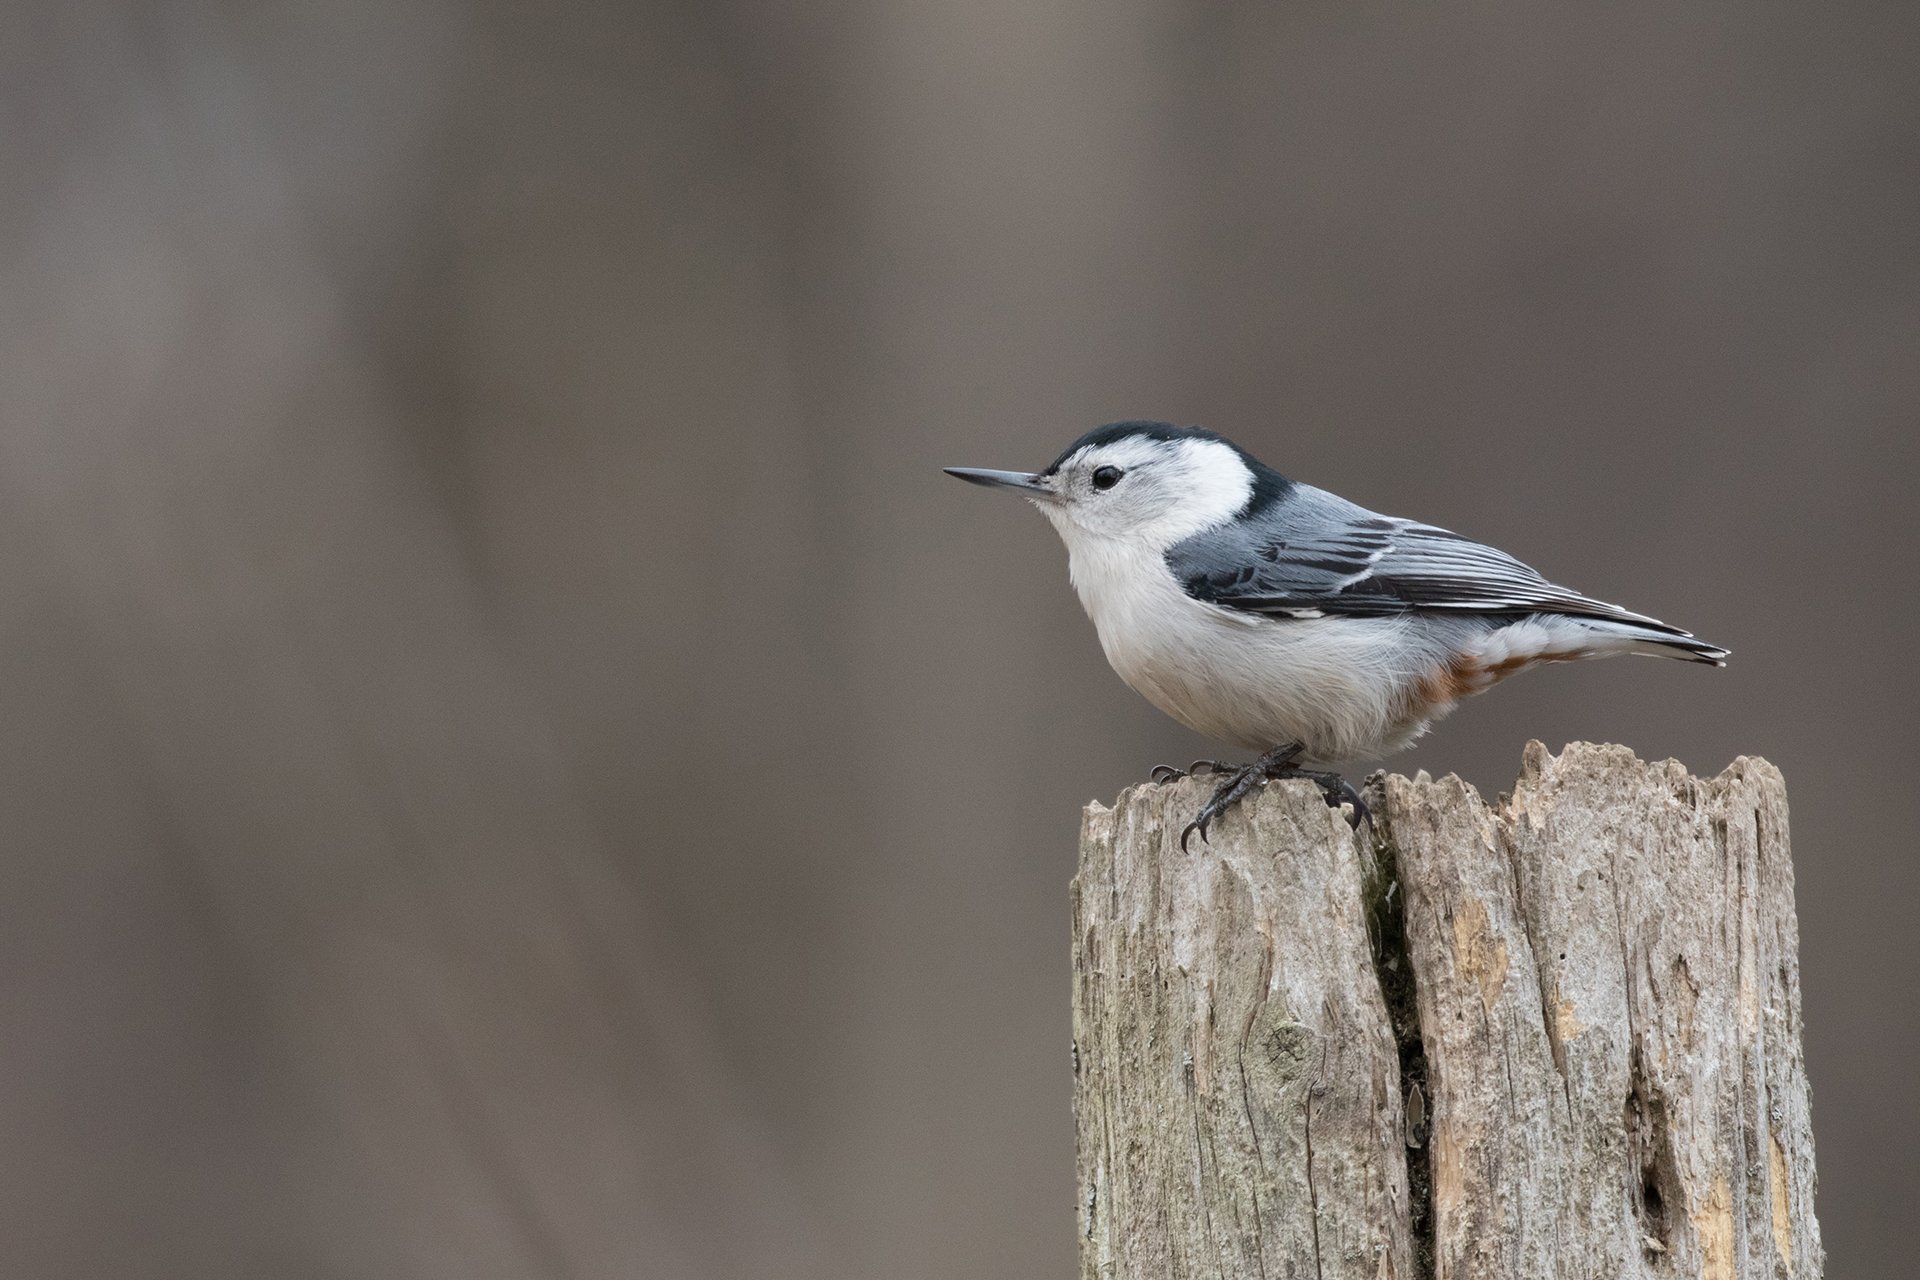 White-breasted Nuthatch sitting on a tree stump